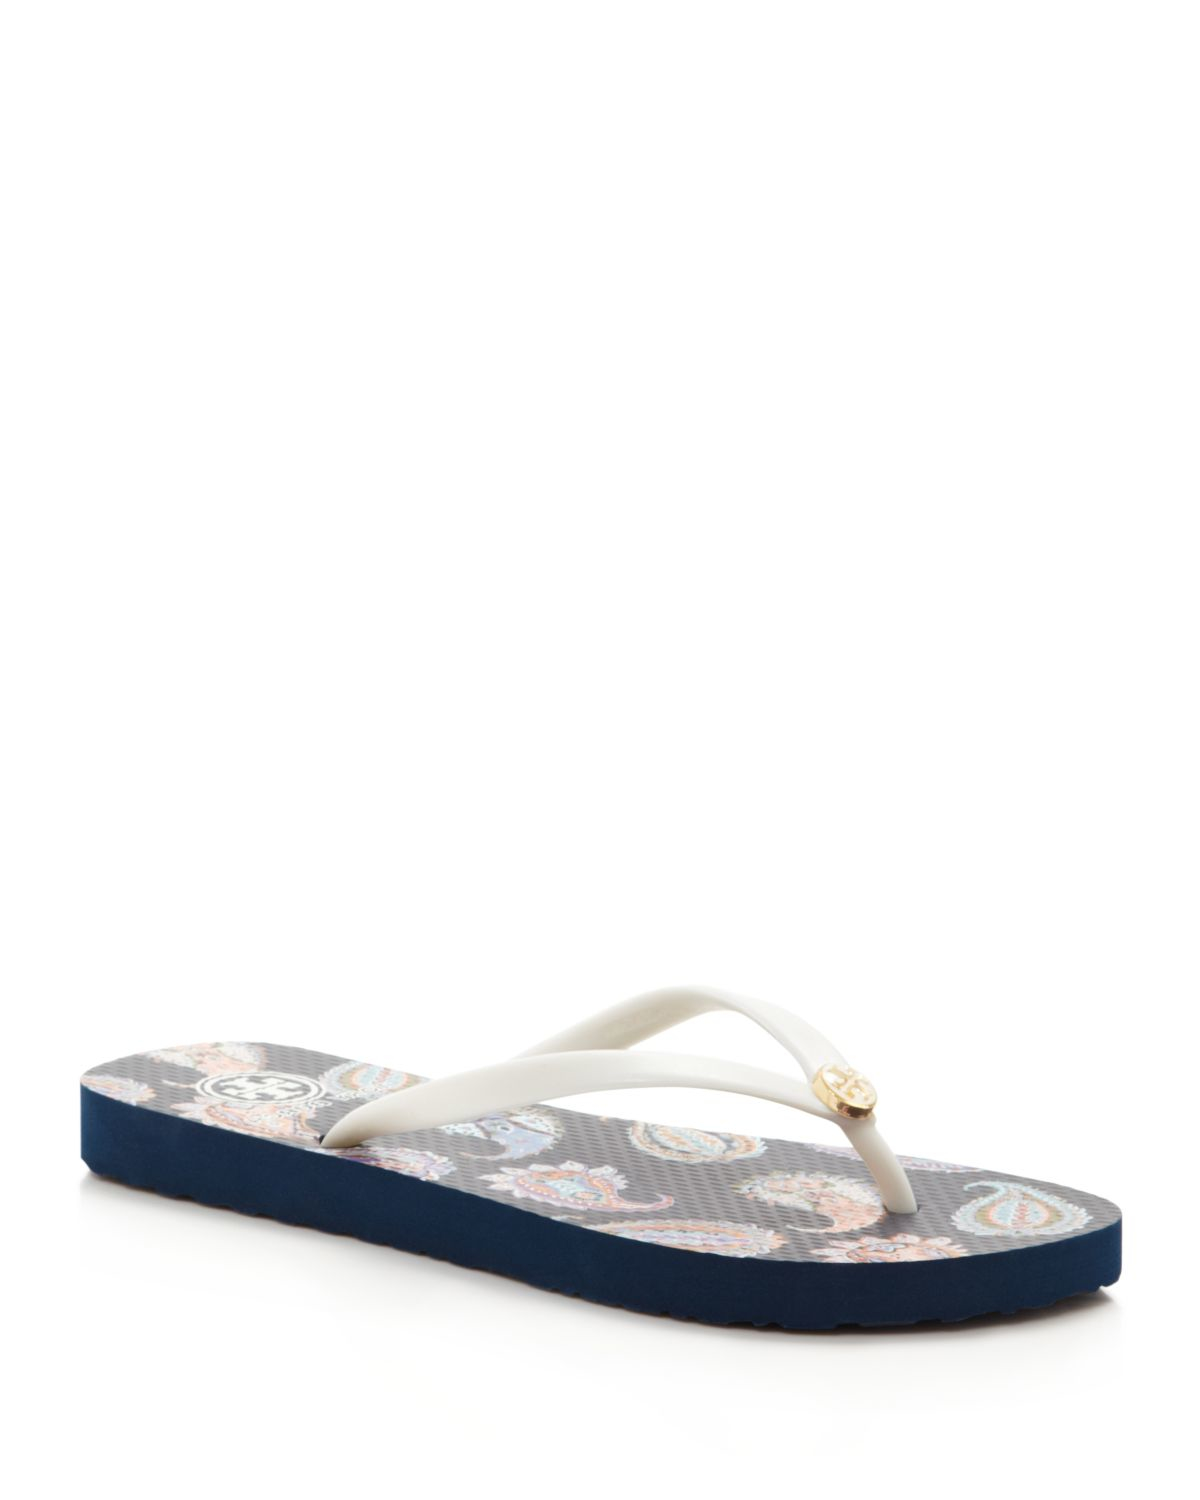 Tory Burch Flip Flops - Thin Paisley in White | Lyst